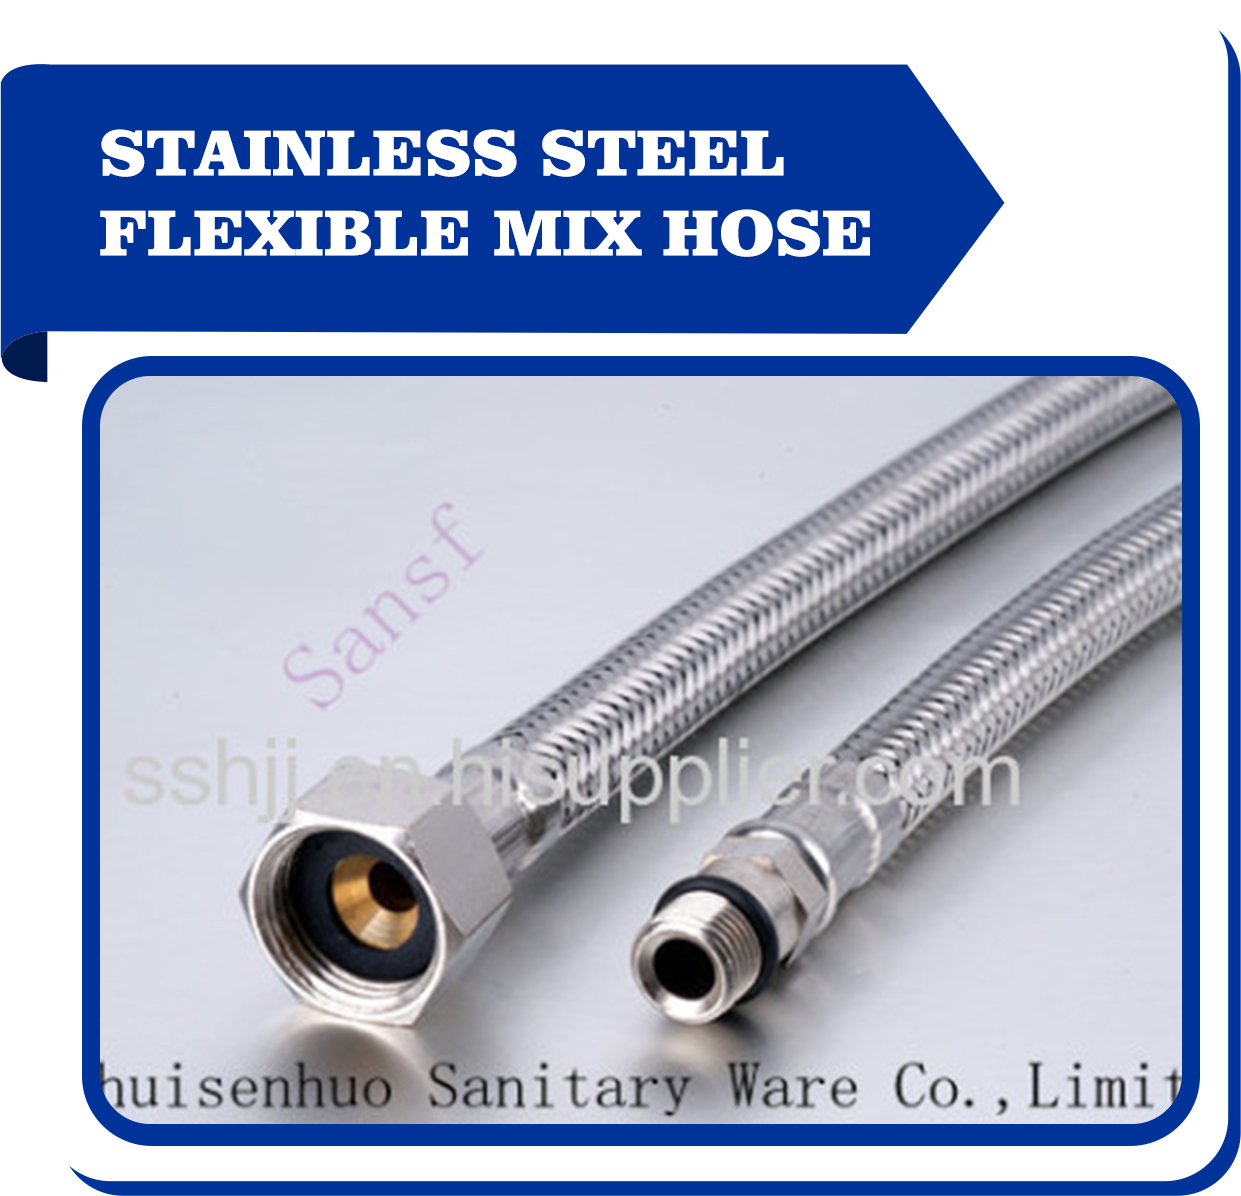 stainless steel flexible mix hose